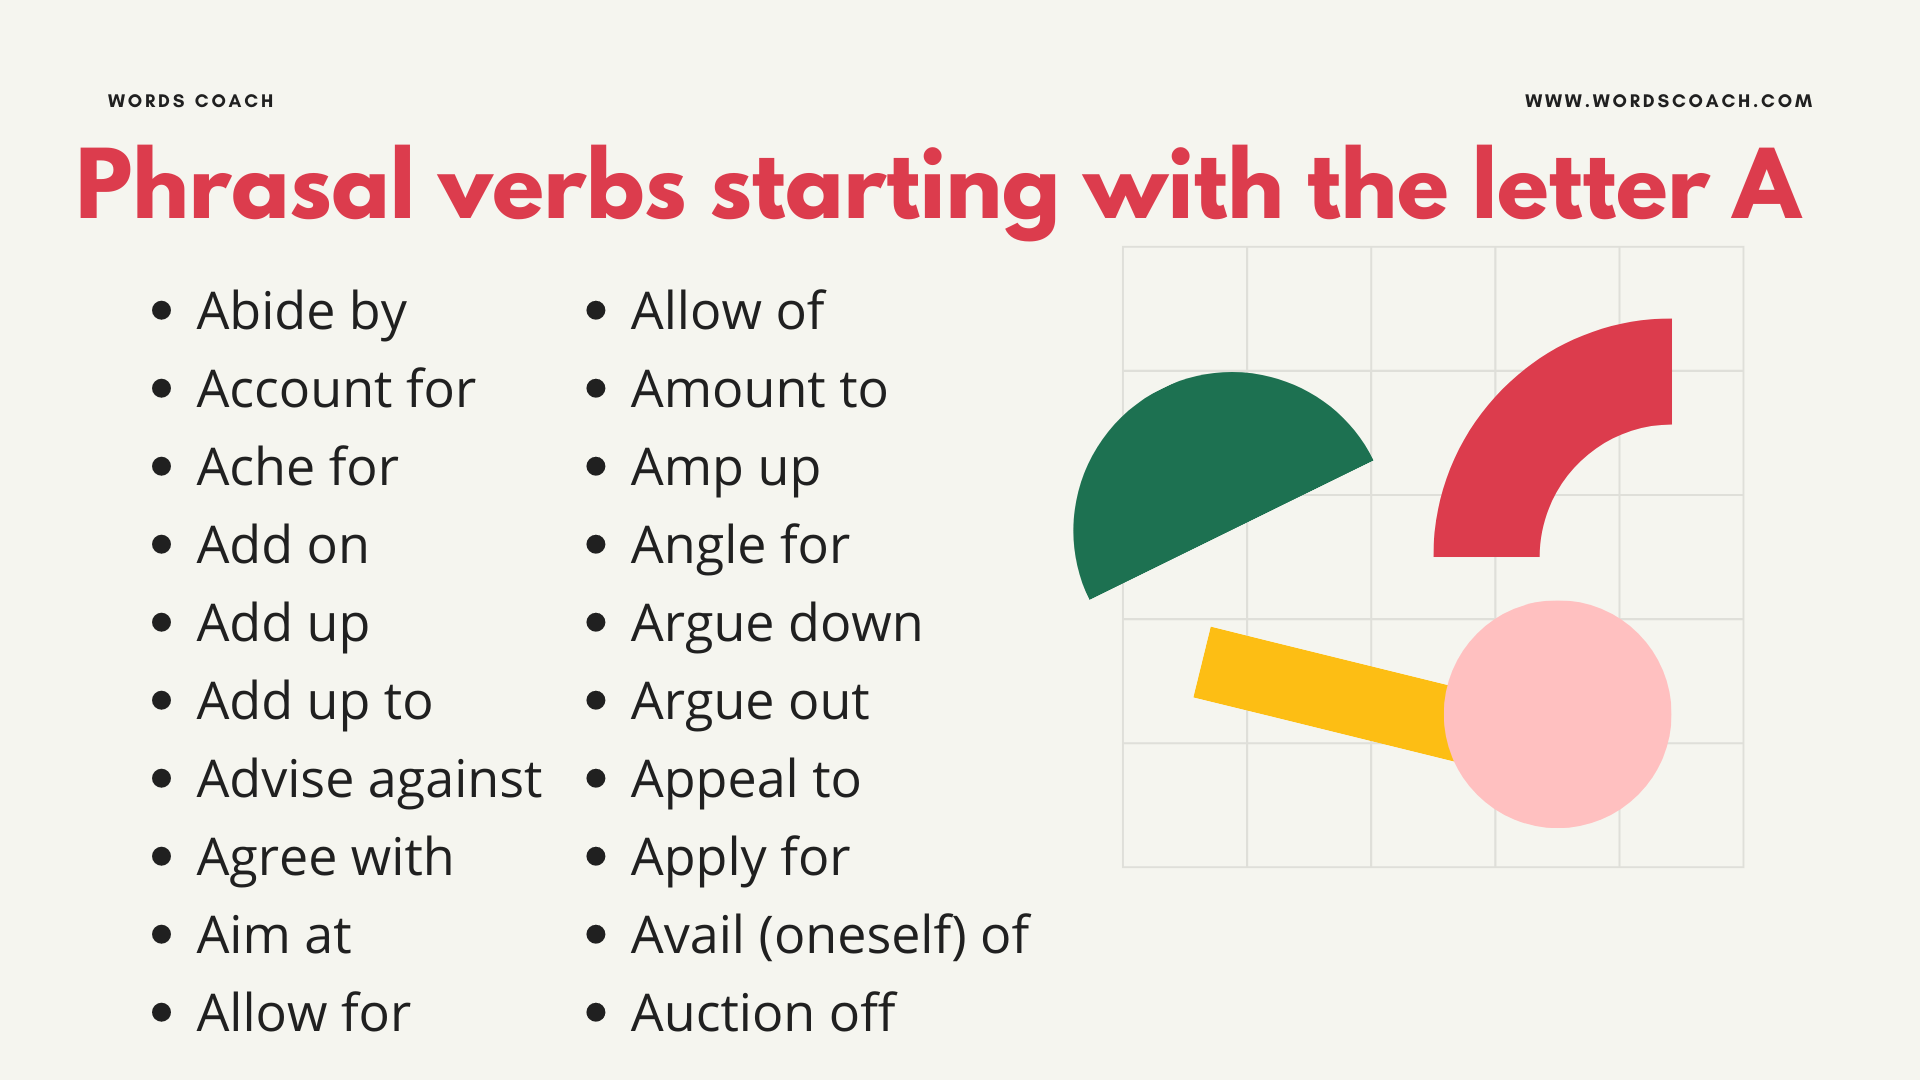 Phrasal verbs starting with the letter A